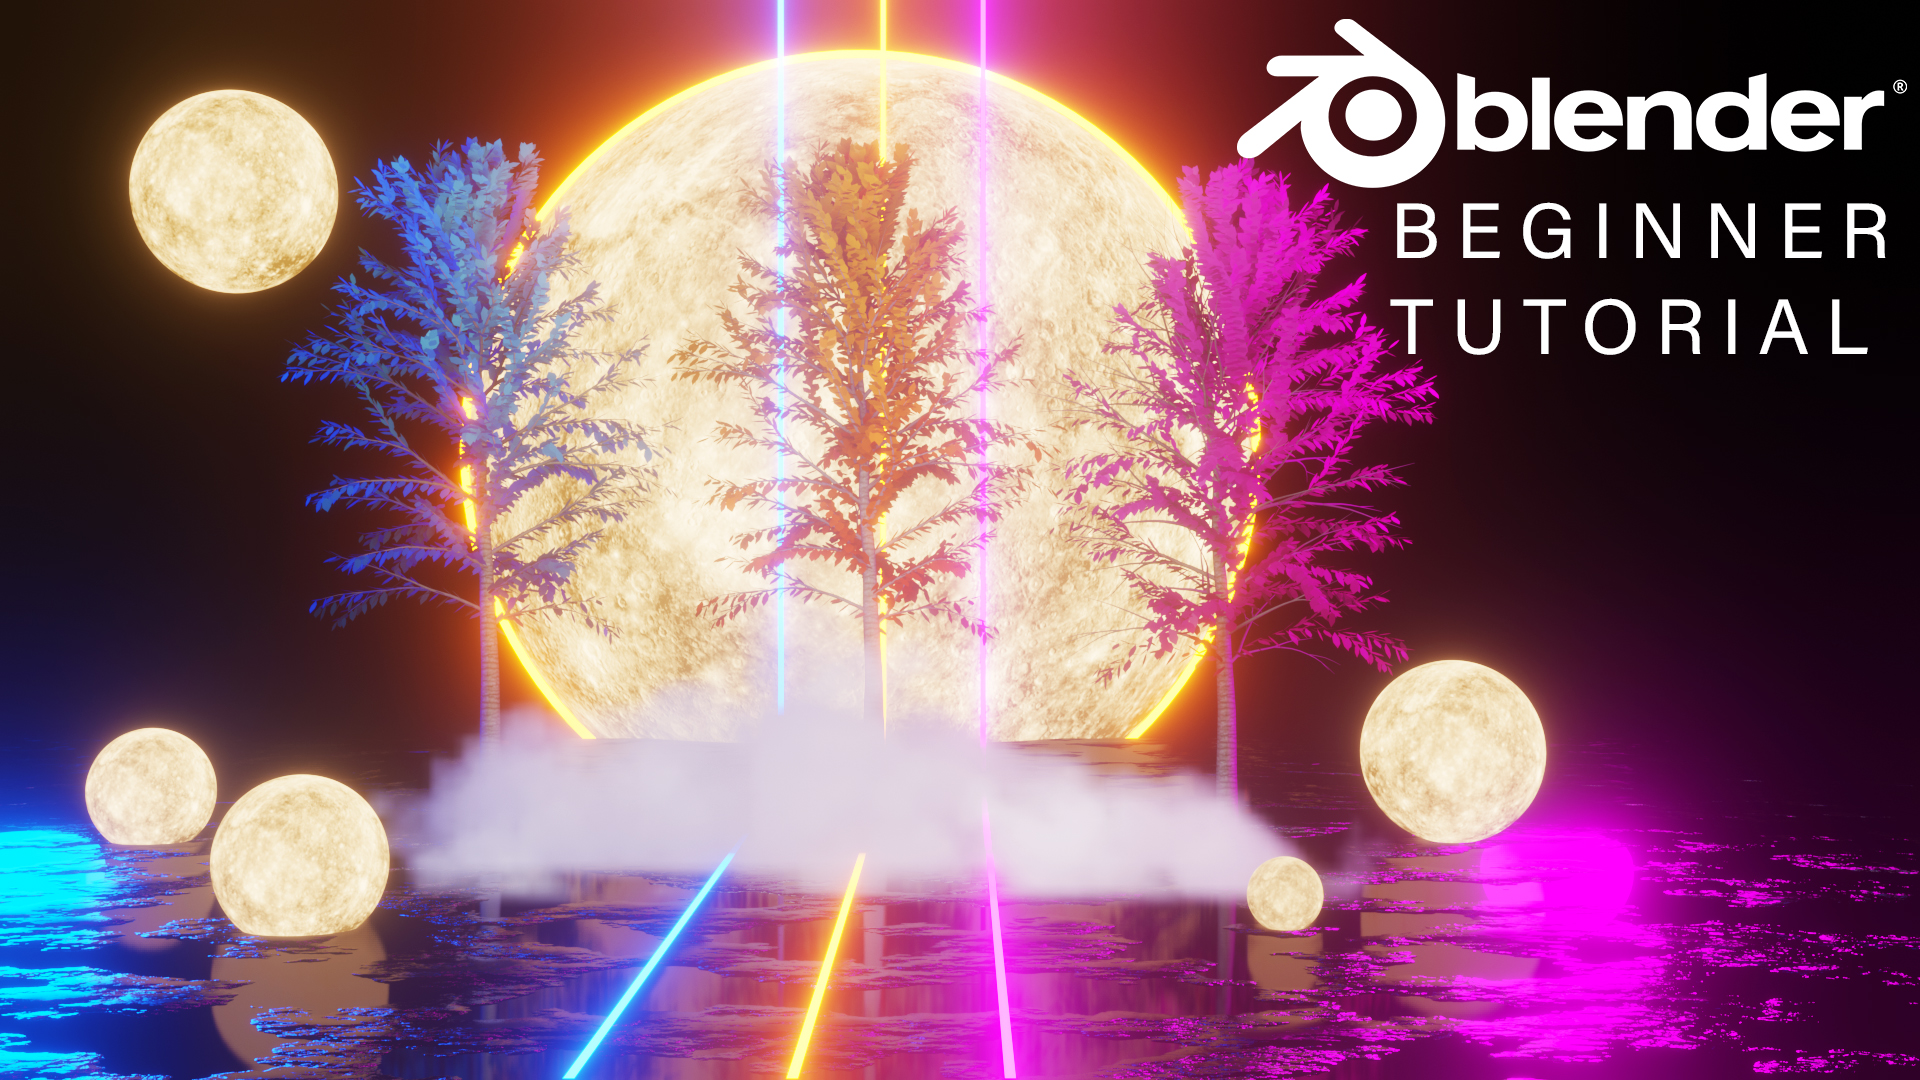 Blender Tutorial – Create Landscape with Tree & Moon Lighting ( FREE PROJECT )